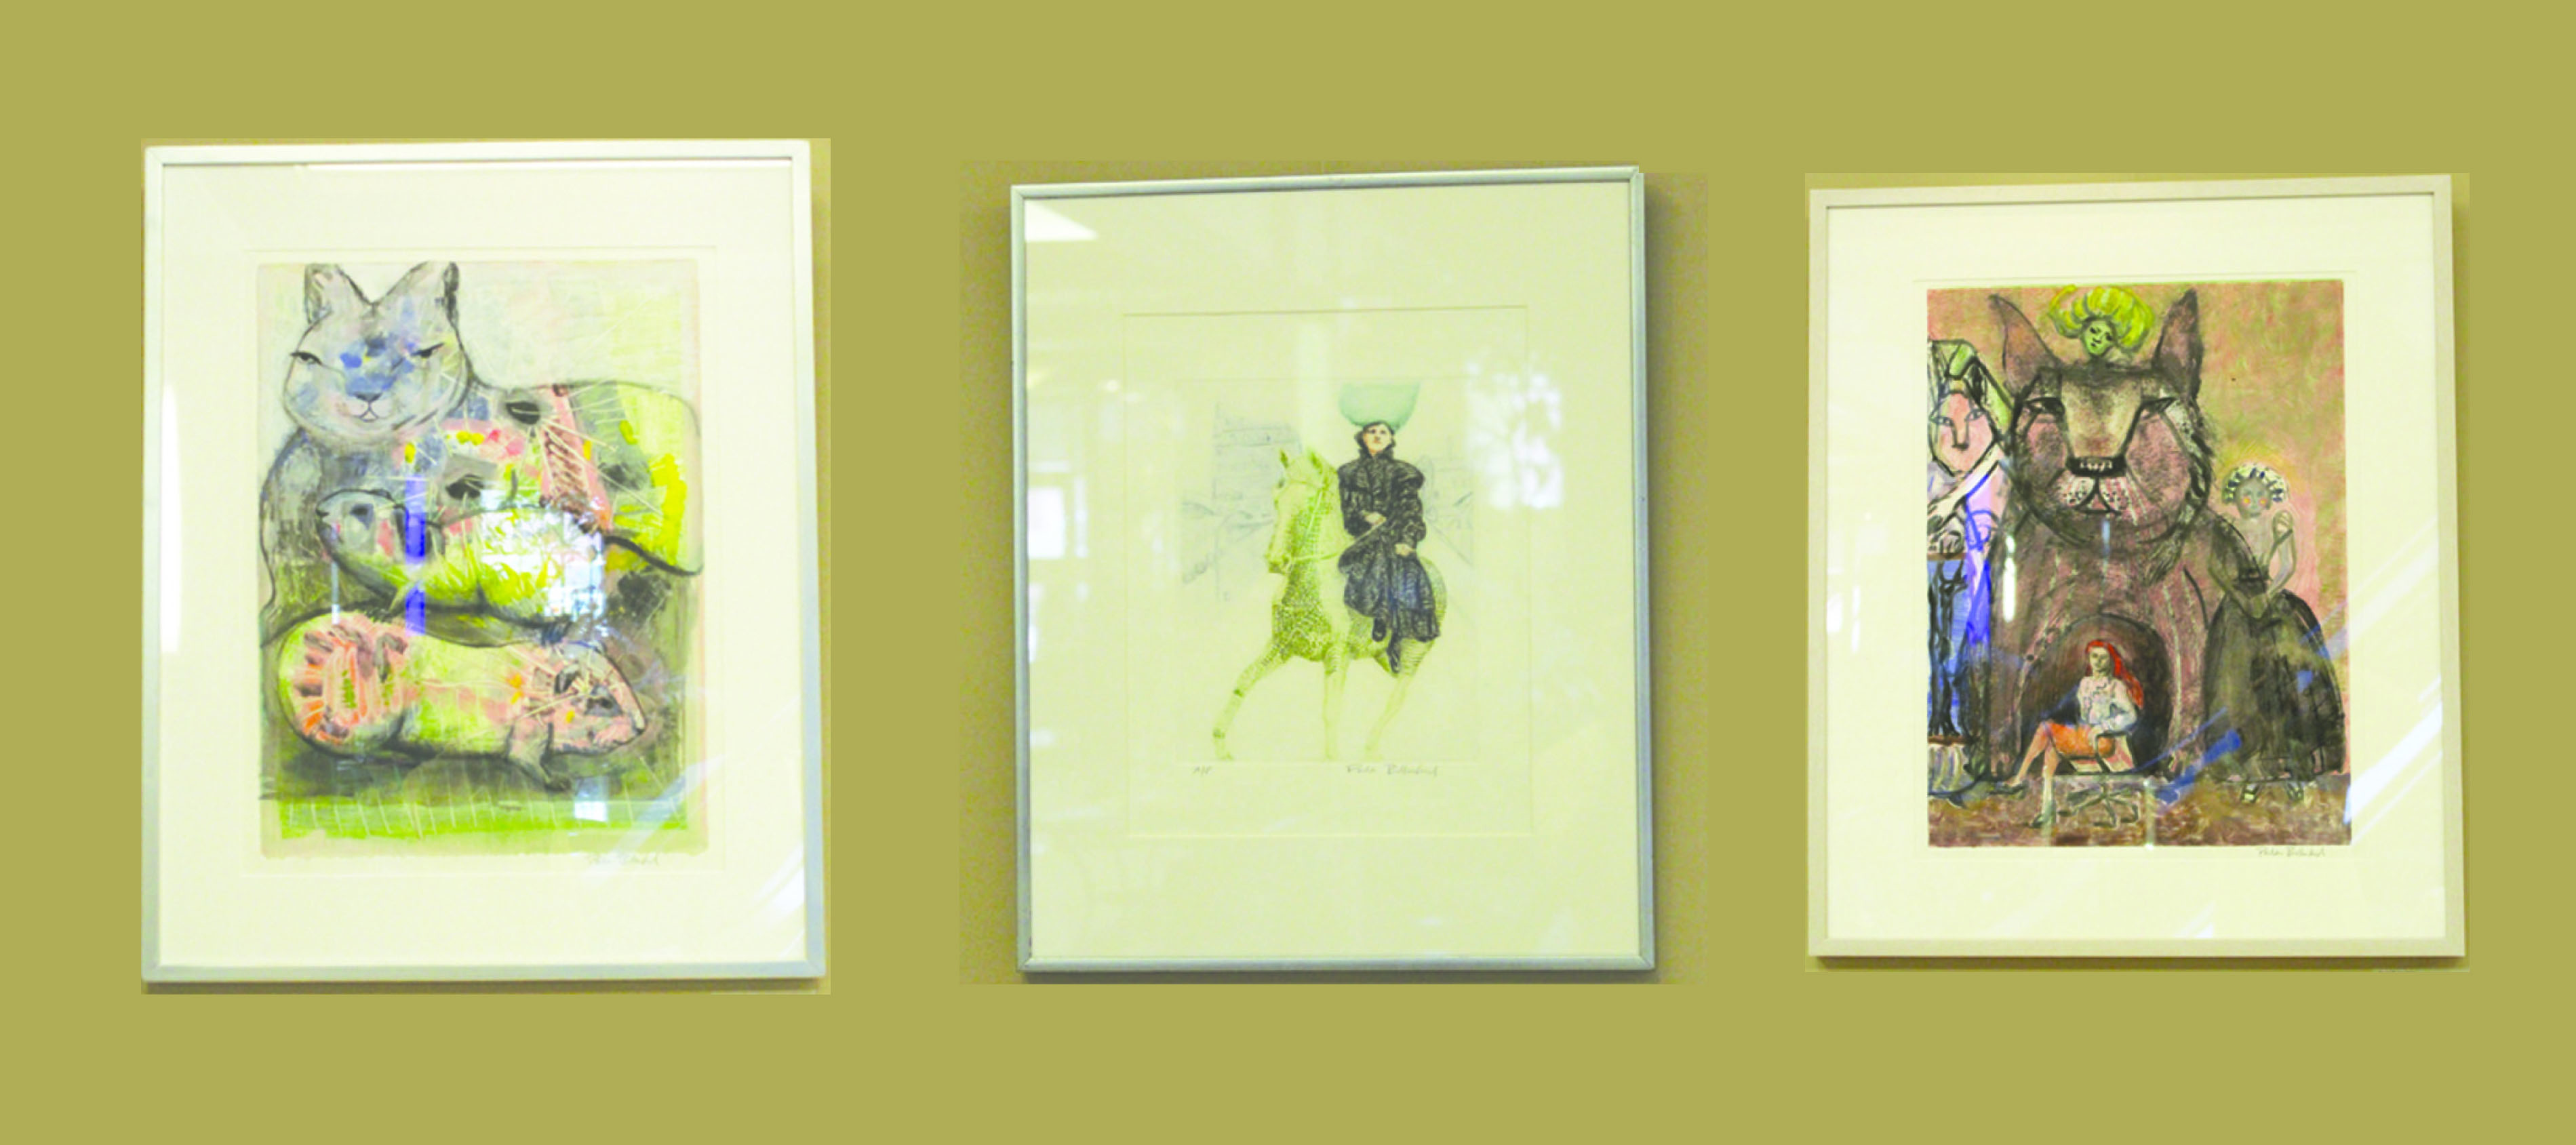 Artwork by Paula Bullwinkel displayed in the Franklin Crossing Atrium. Right: Family, Monotype with mixed-media. Center: Annie Rides, Etching. Left: Cat Cave, Monotype with mixed-media.